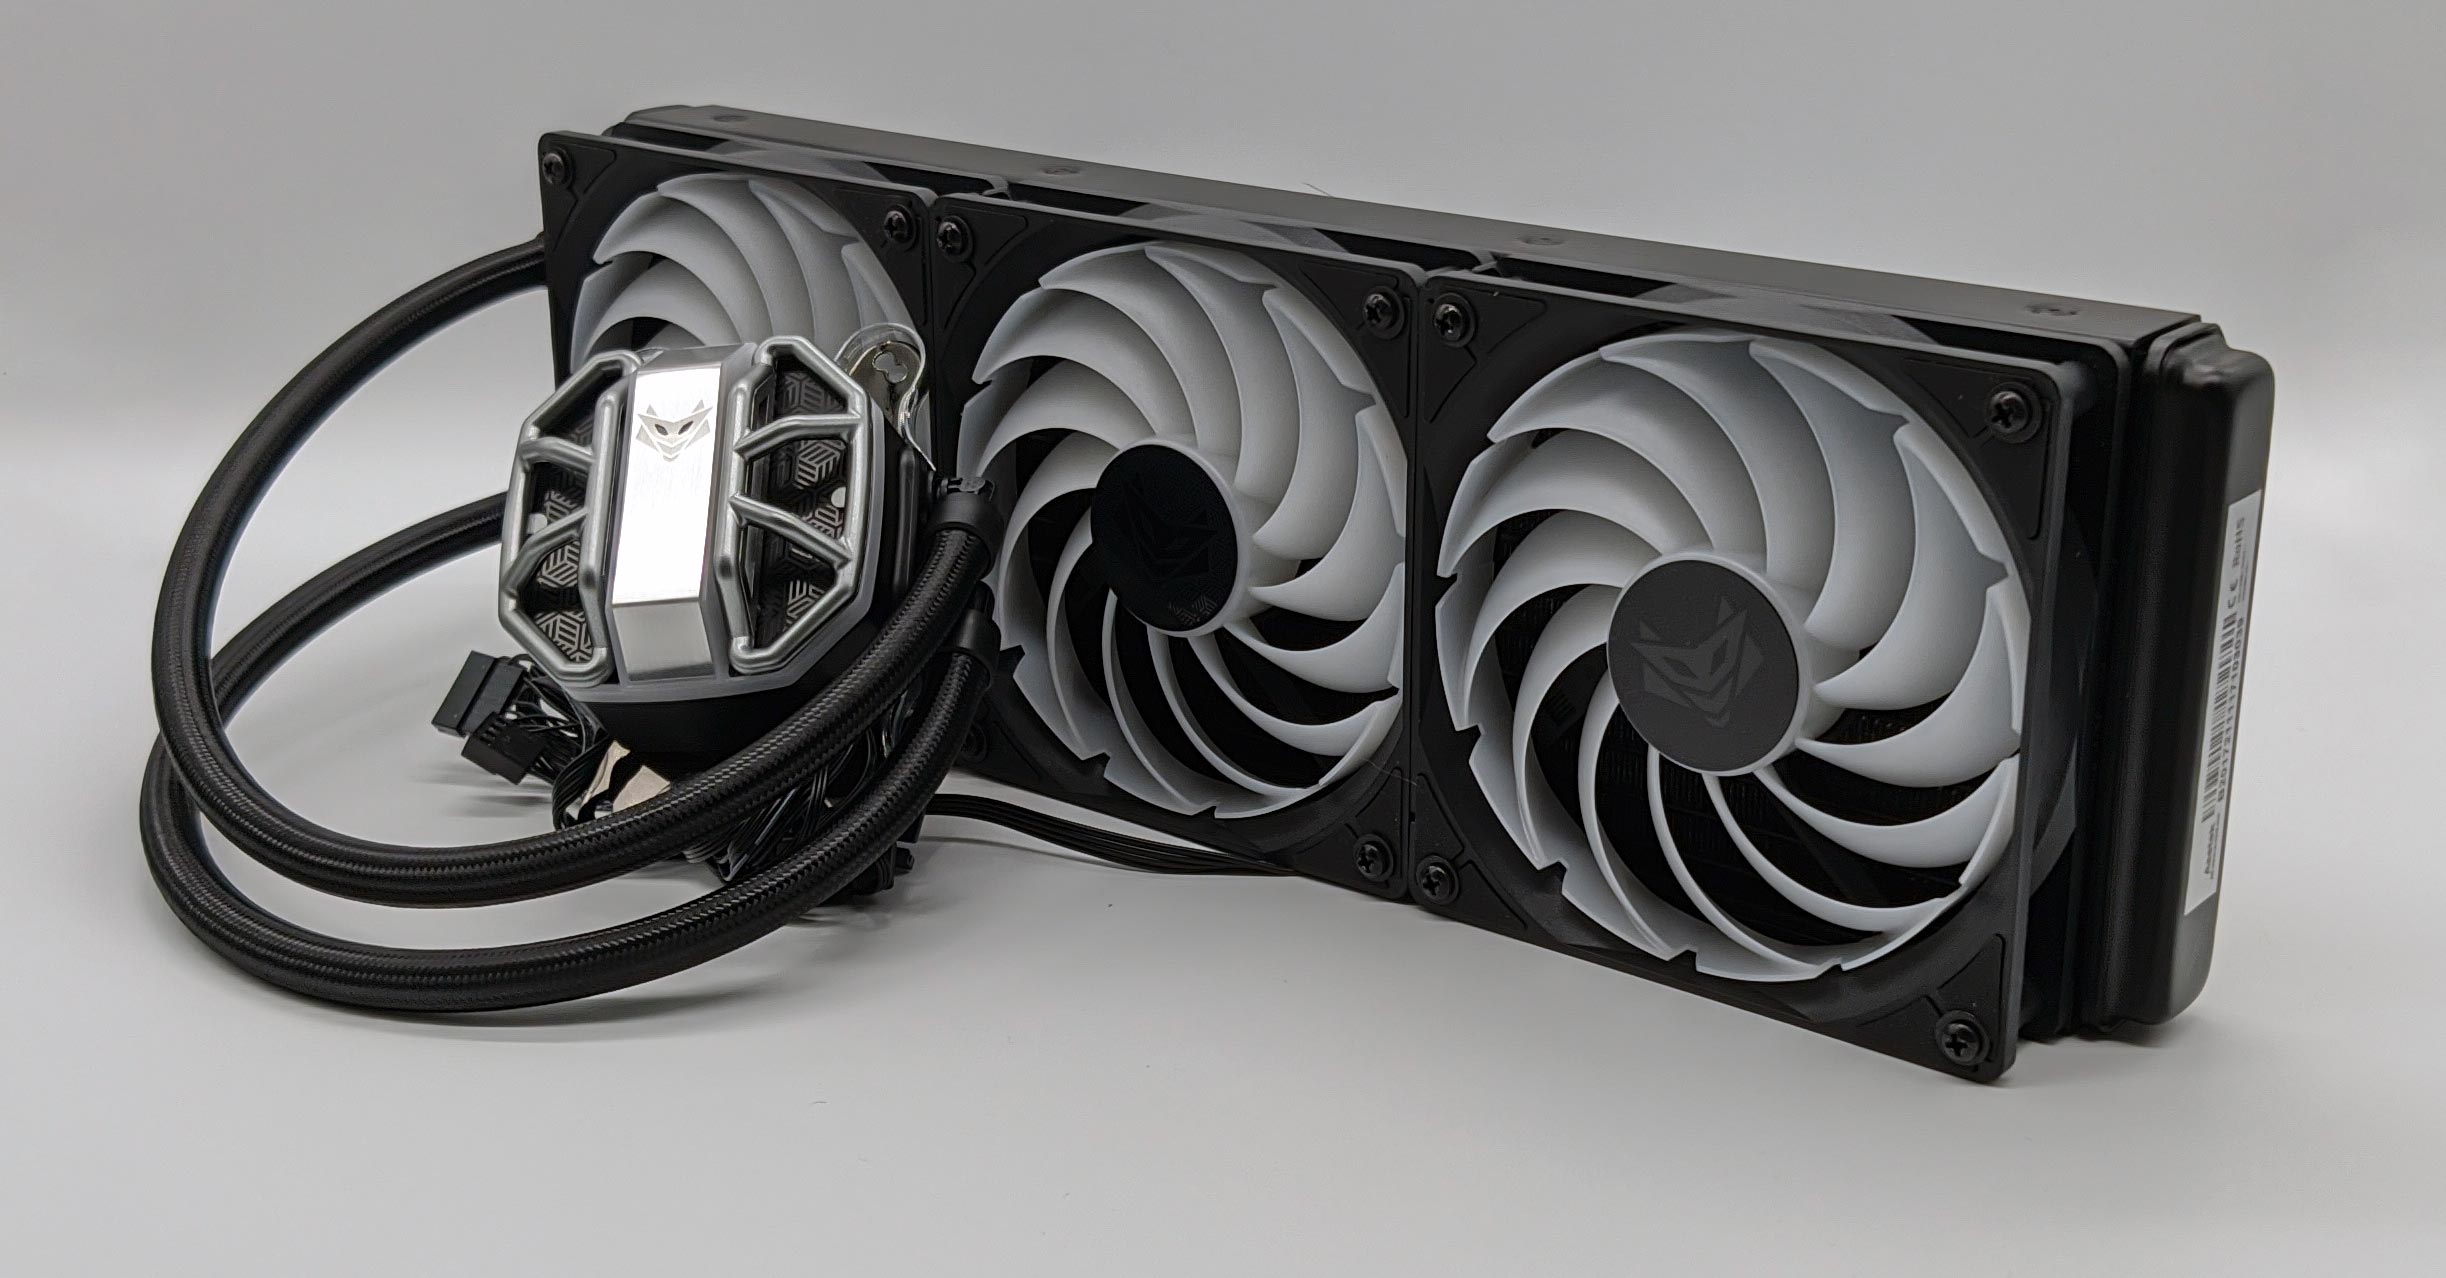 Sapphire Nitro + S360-A in review - GPU manufacturer tries its hand at CPU water coolers